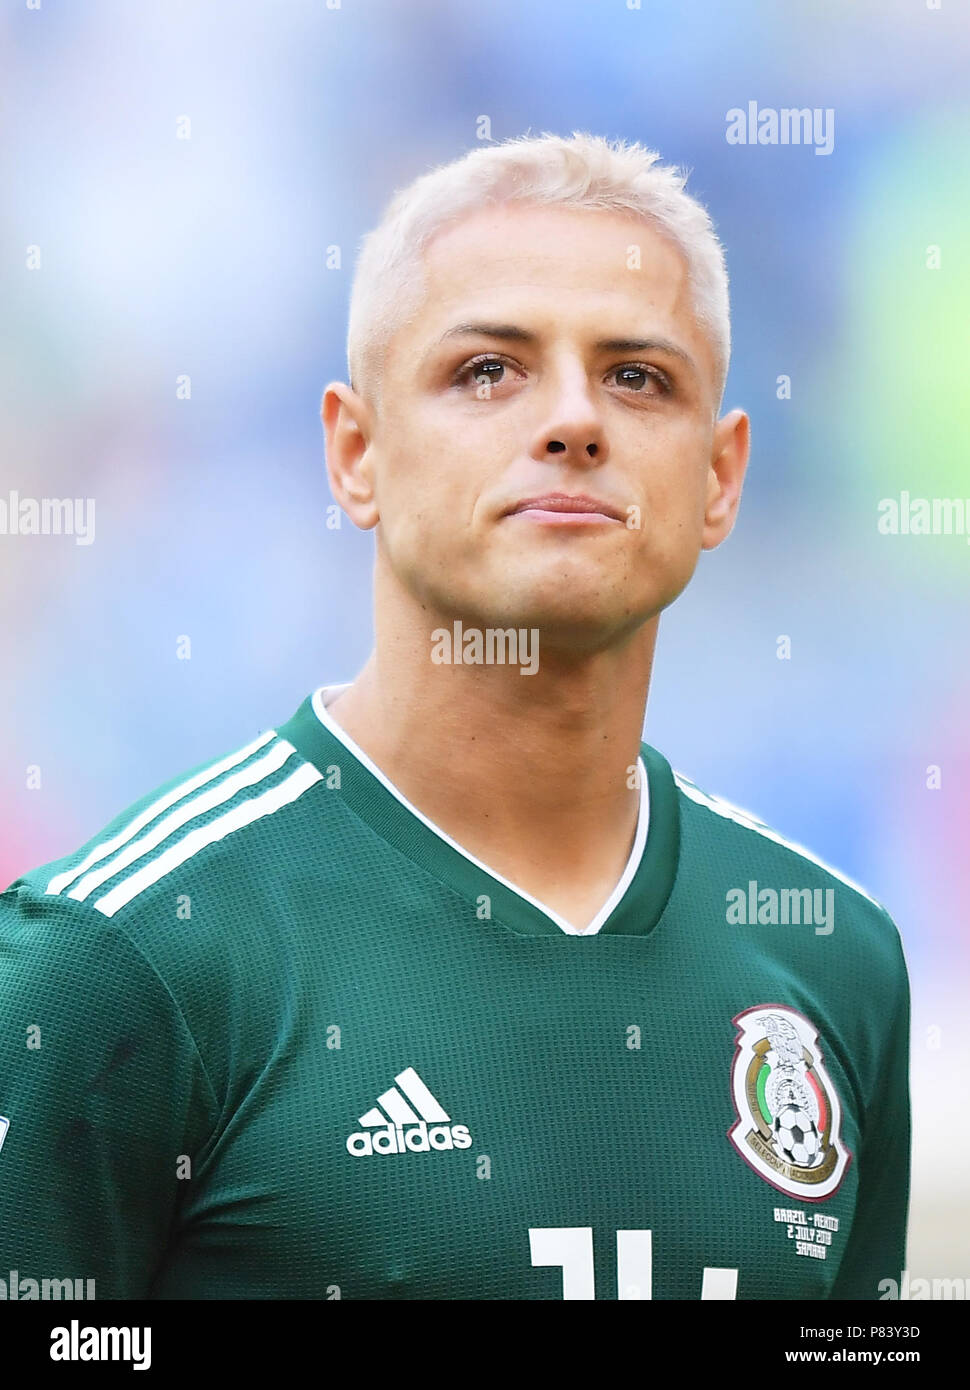 SAMARA, RUSSIA - JULY 02: Javier Hernandez of Mexico during the 2018 FIFA World Cup Russia Round of 16 match between Brazil and Mexico at Samara Arena on July 2, 2018 in Samara, Russia. (Photo by Lukasz Laskowski/PressFocus/MB Media) Stock Photo